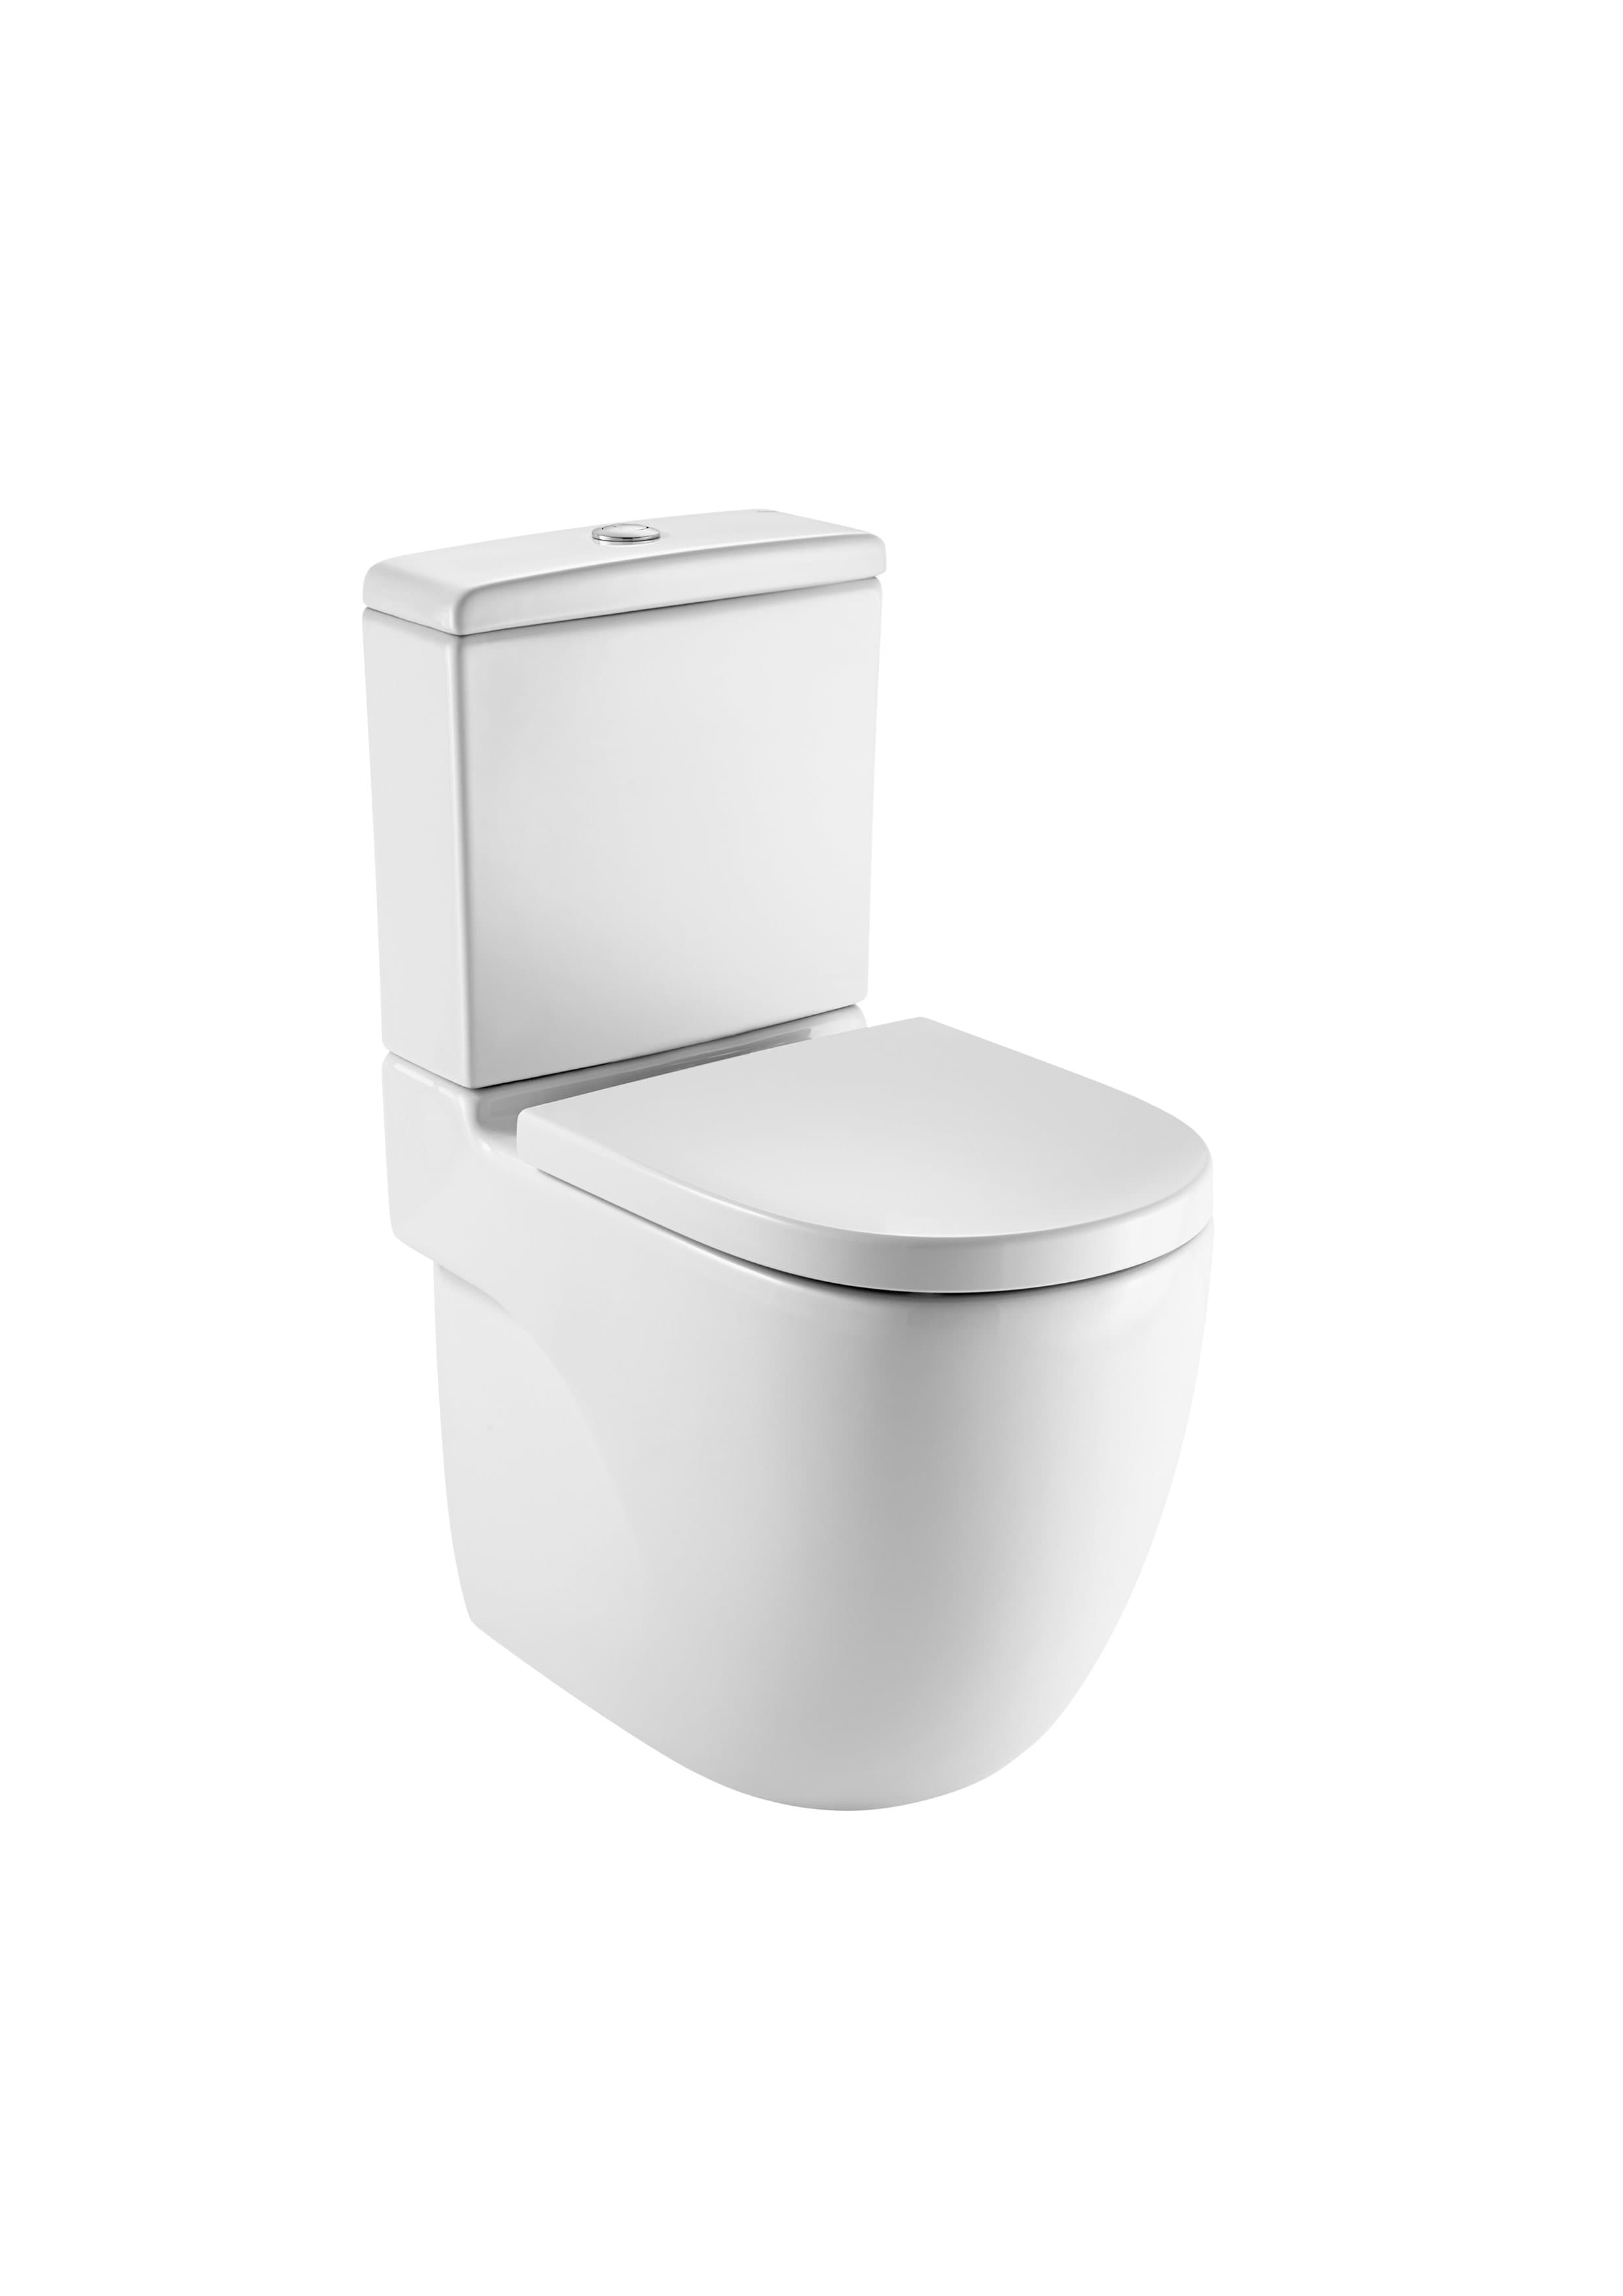 Vitreous china closed-coupled wc with dual outlet. P-Trap or S-Trap 305 mm. Roca A34224B000